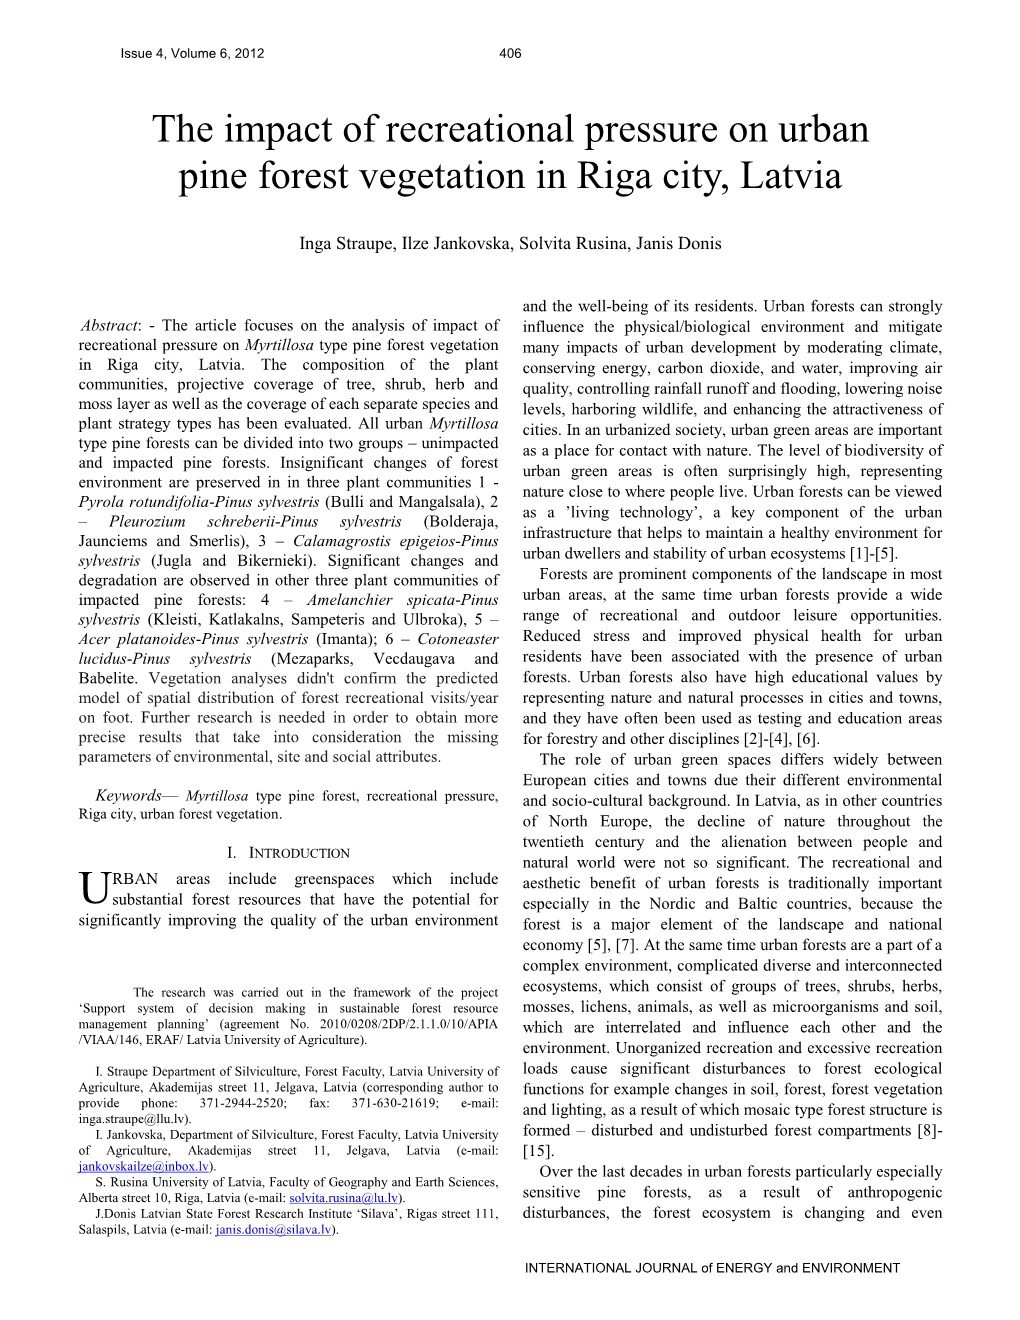 The Impact of Recreational Pressure on Urban Pine Forest Vegetation in Riga City, Latvia